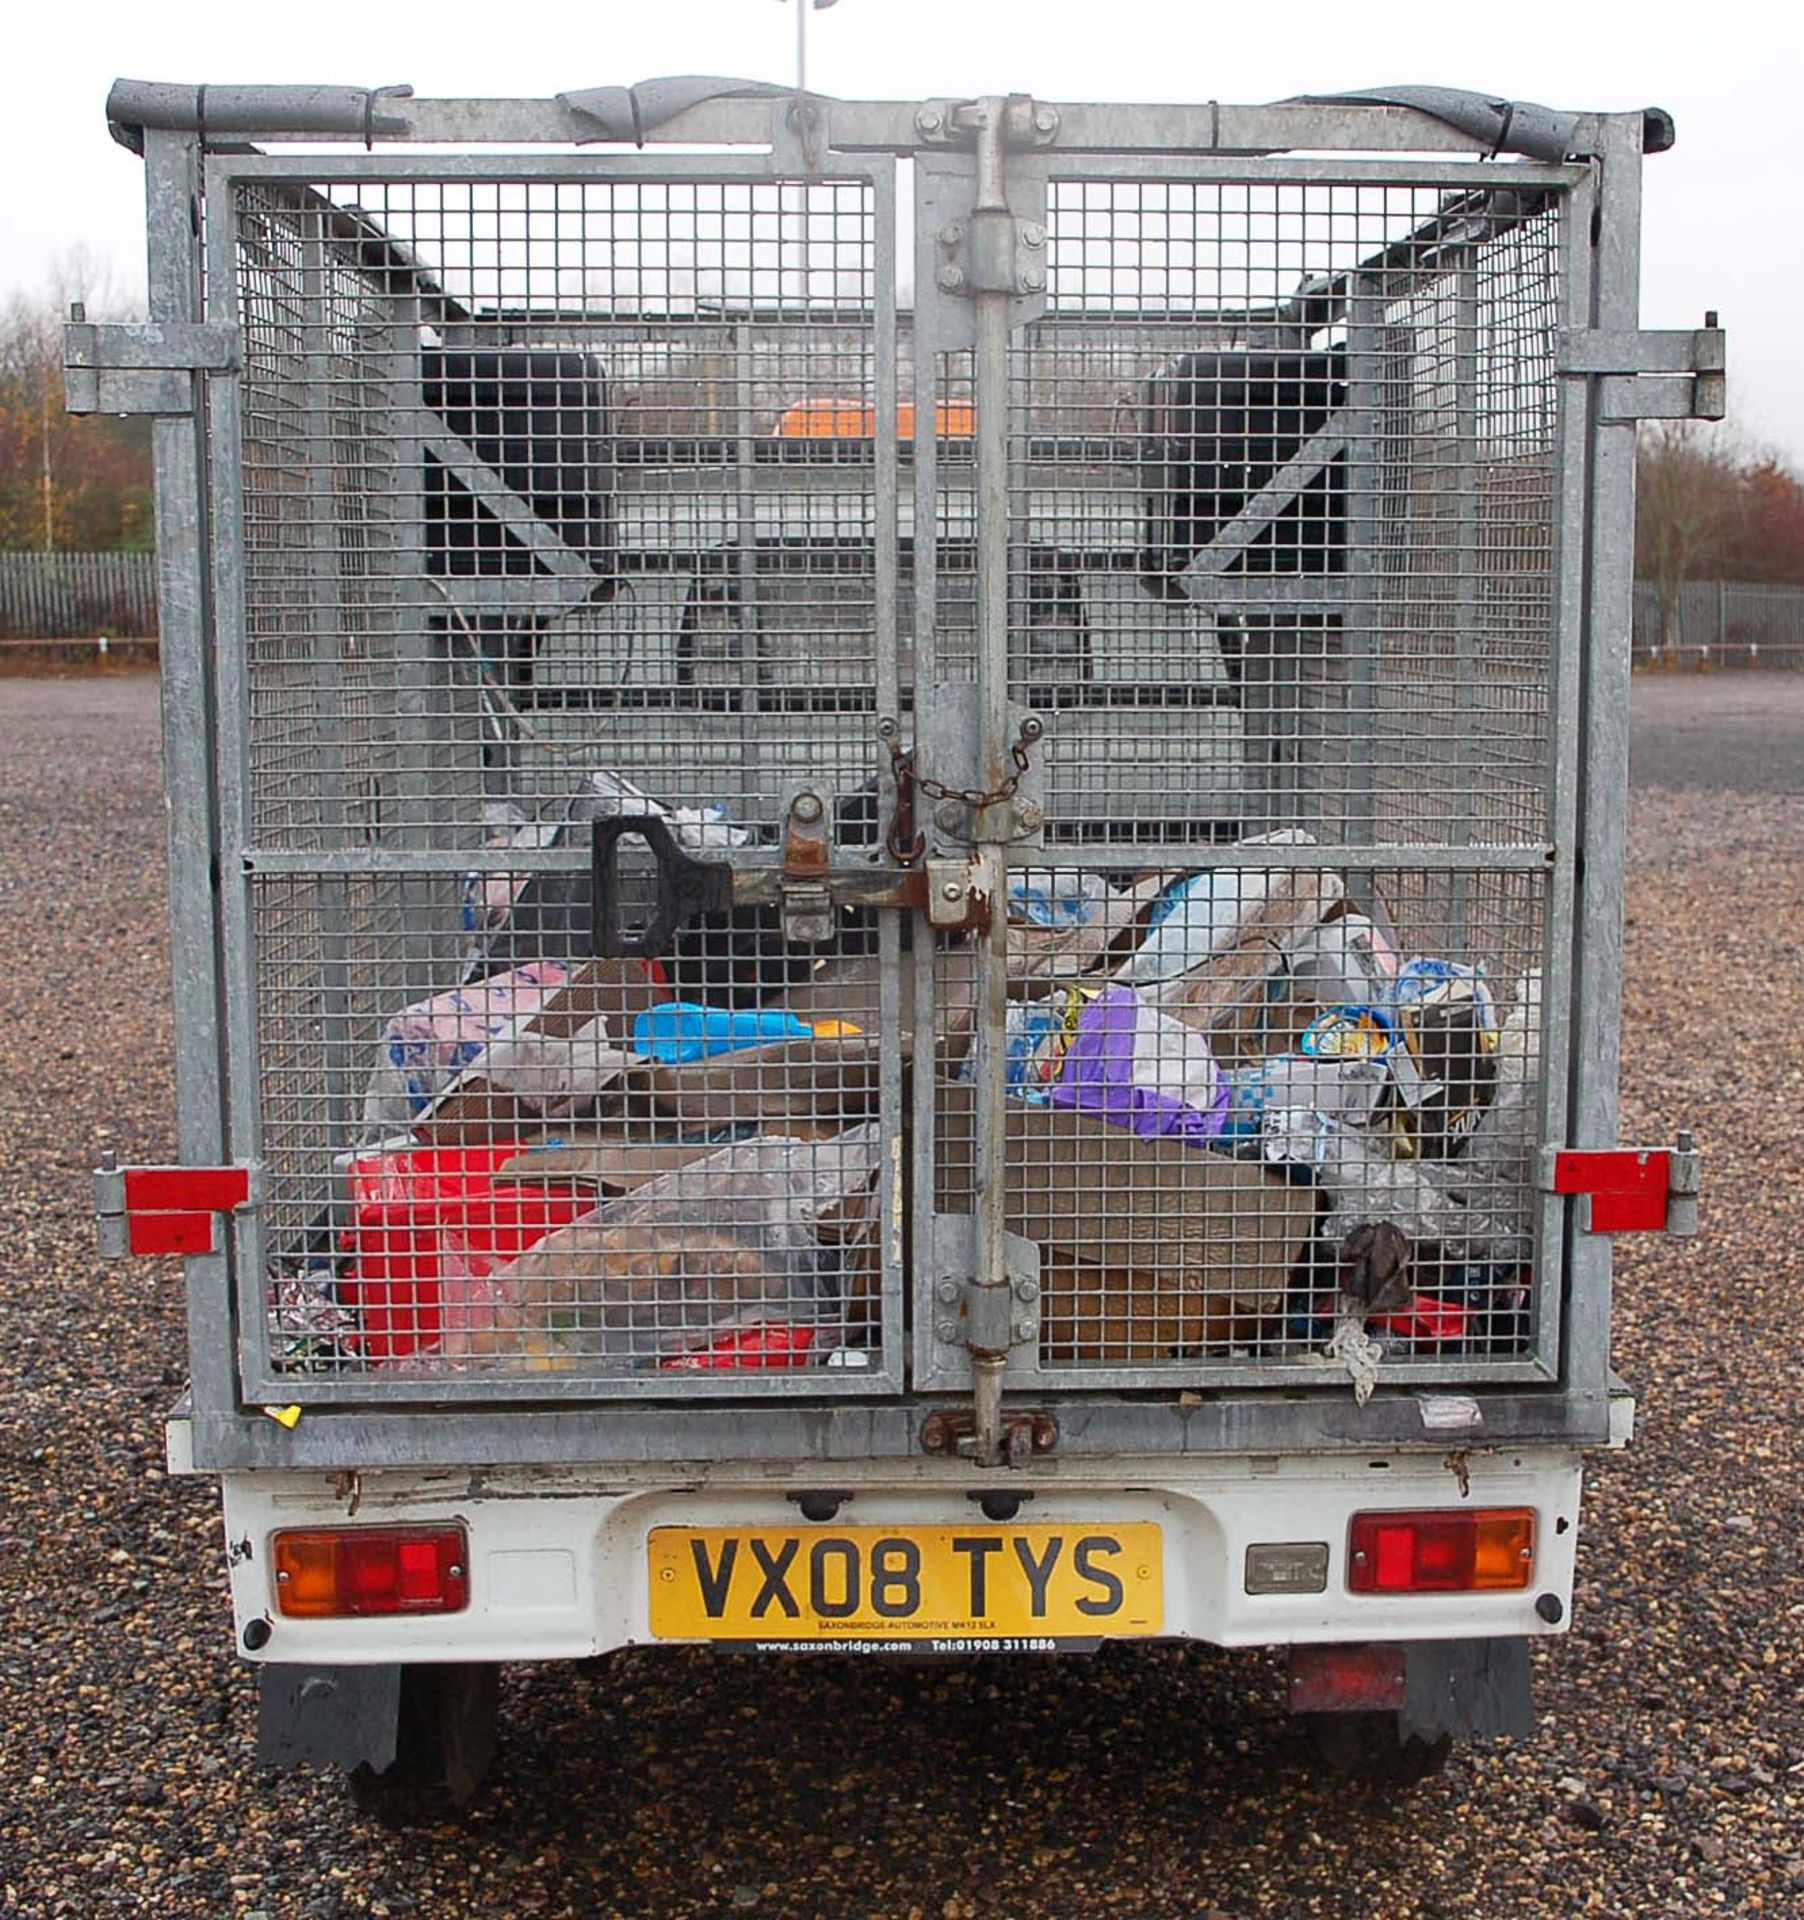 A PIAGGIO PORTER 1.3 Petrol 4WD Cage Bodied Tipper Truck. Registration Number: VX08 TYS. 5-Speed - Image 5 of 7